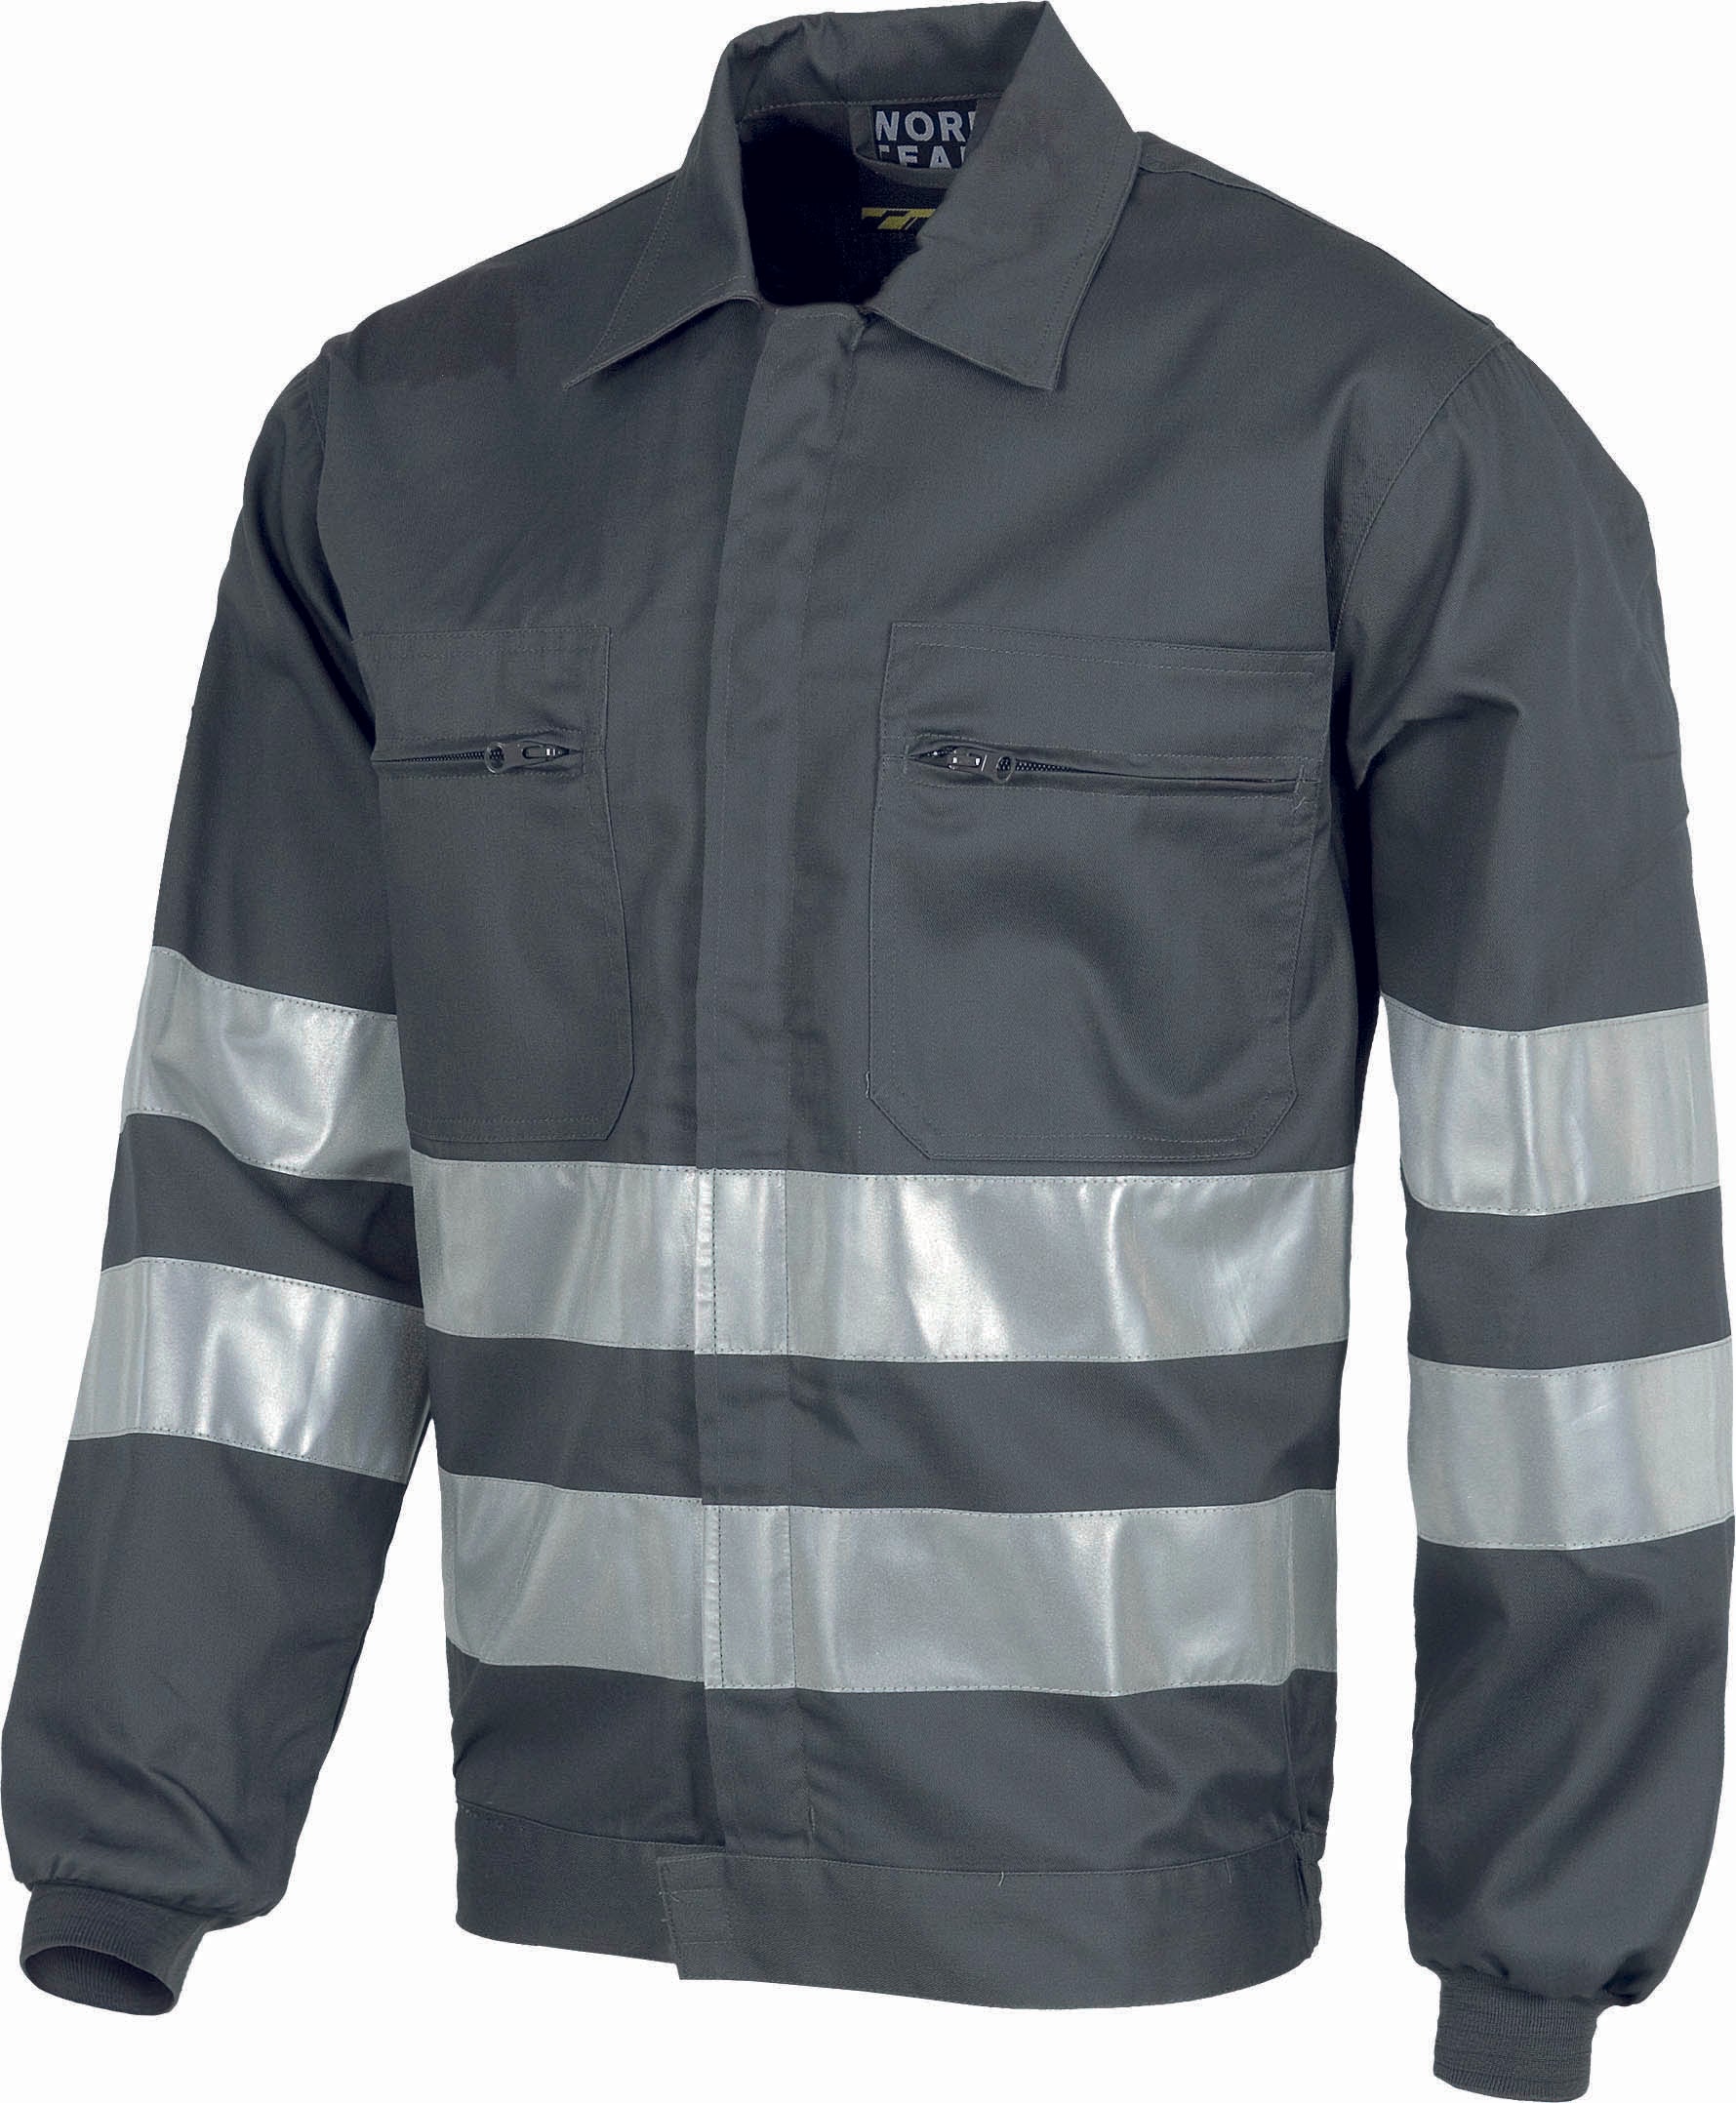 Jacket with high Visibility Stripes (EU Compliant)